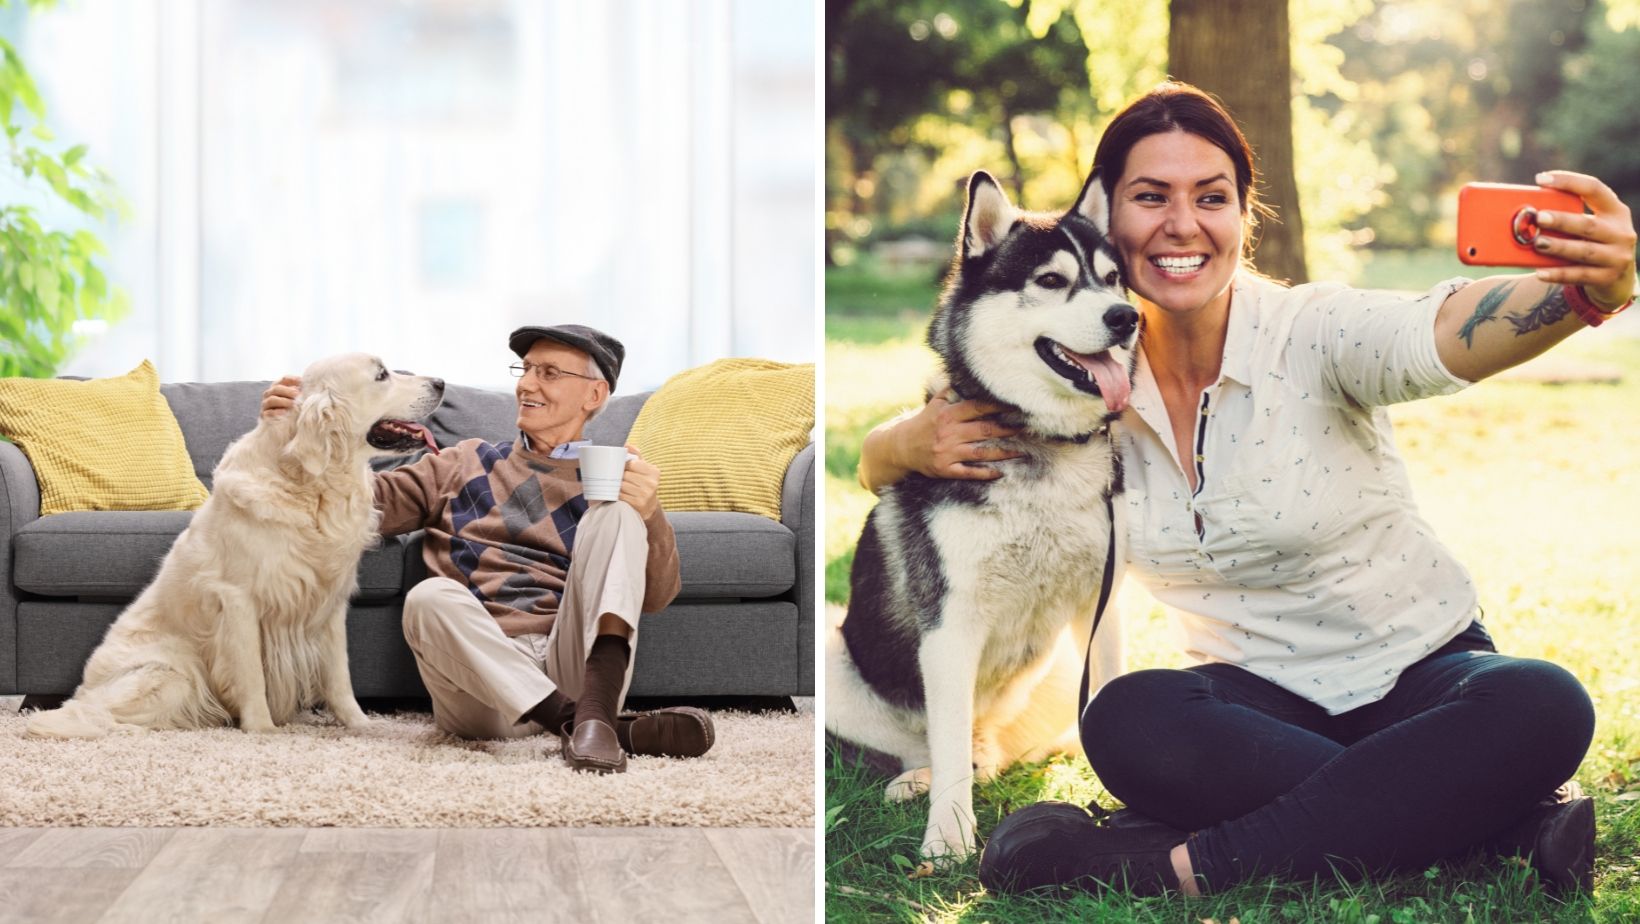 A man is dog sitting a dog at home while a woman is dog sitting a dog outdoors